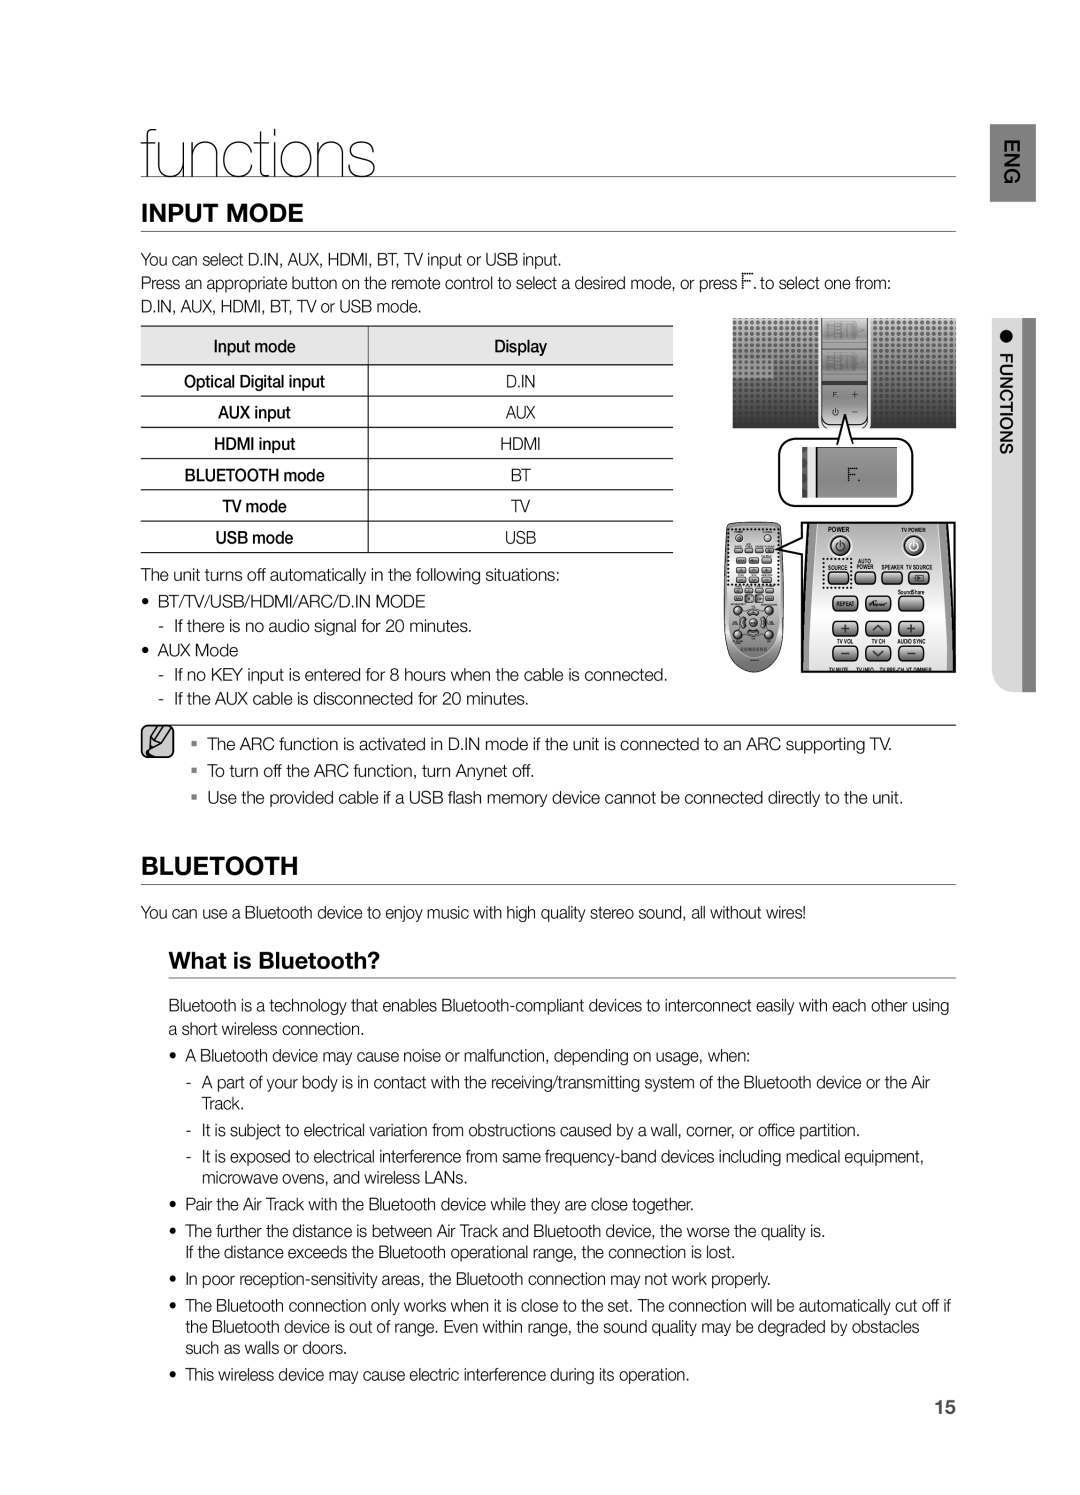 Samsung HW F750, HWF750ZA user manual functions, input mode, What is Bluetooth?, Bt/Tv/Usb/Hdmi/Arc/D.In Mode, AUX Mode 